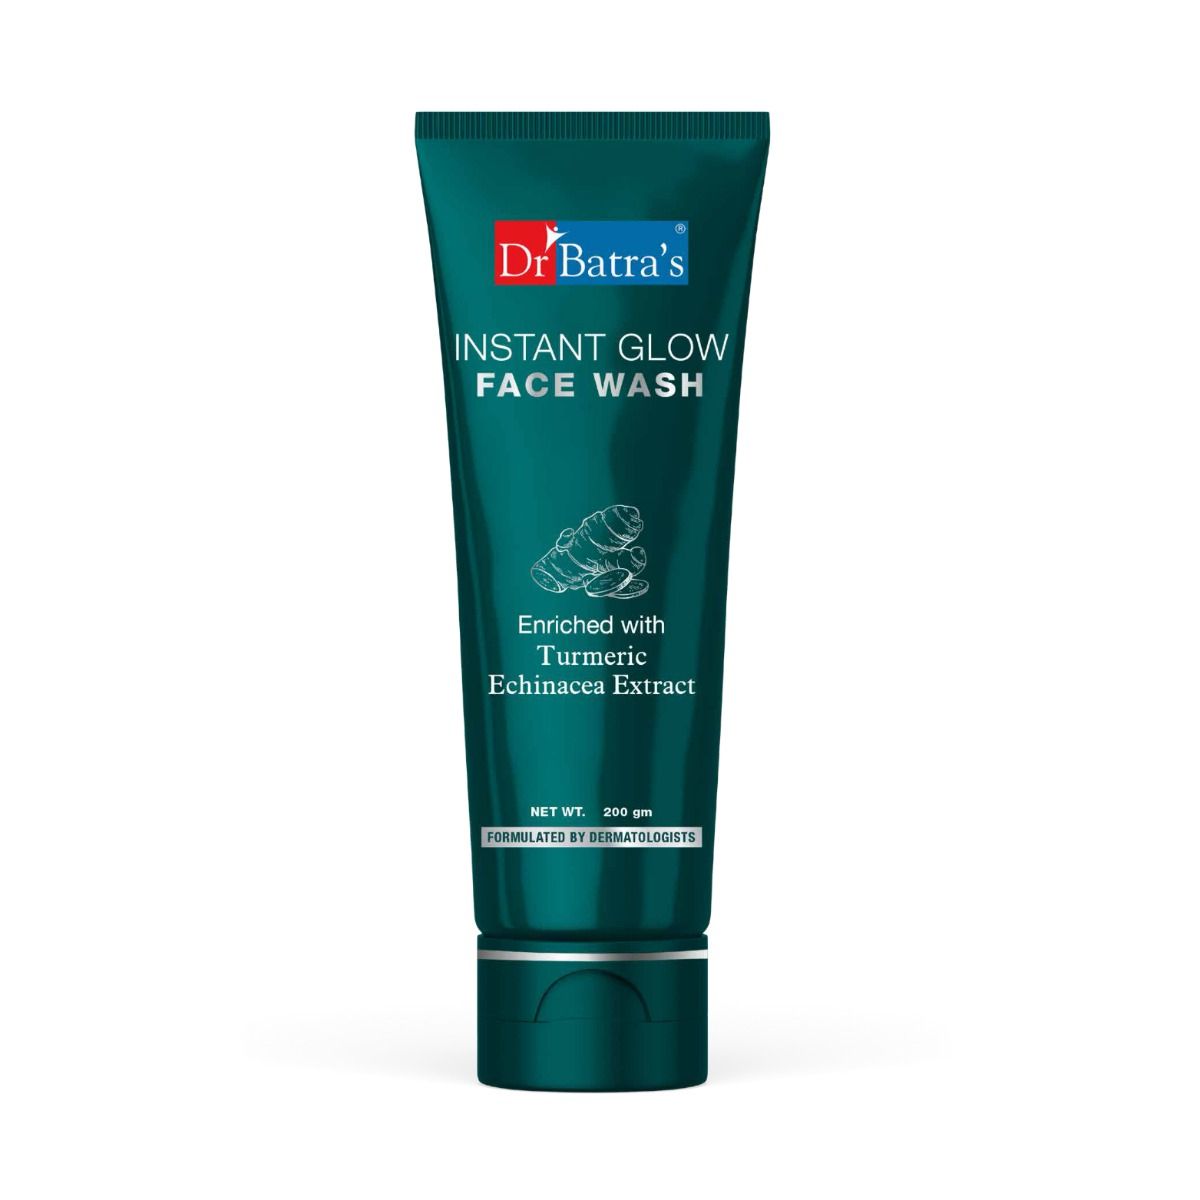     			Dr. Batra's Instant Glow Face Wash, Enriched with Echinacea & Turmeric, Paraben & Silicone free (200g)